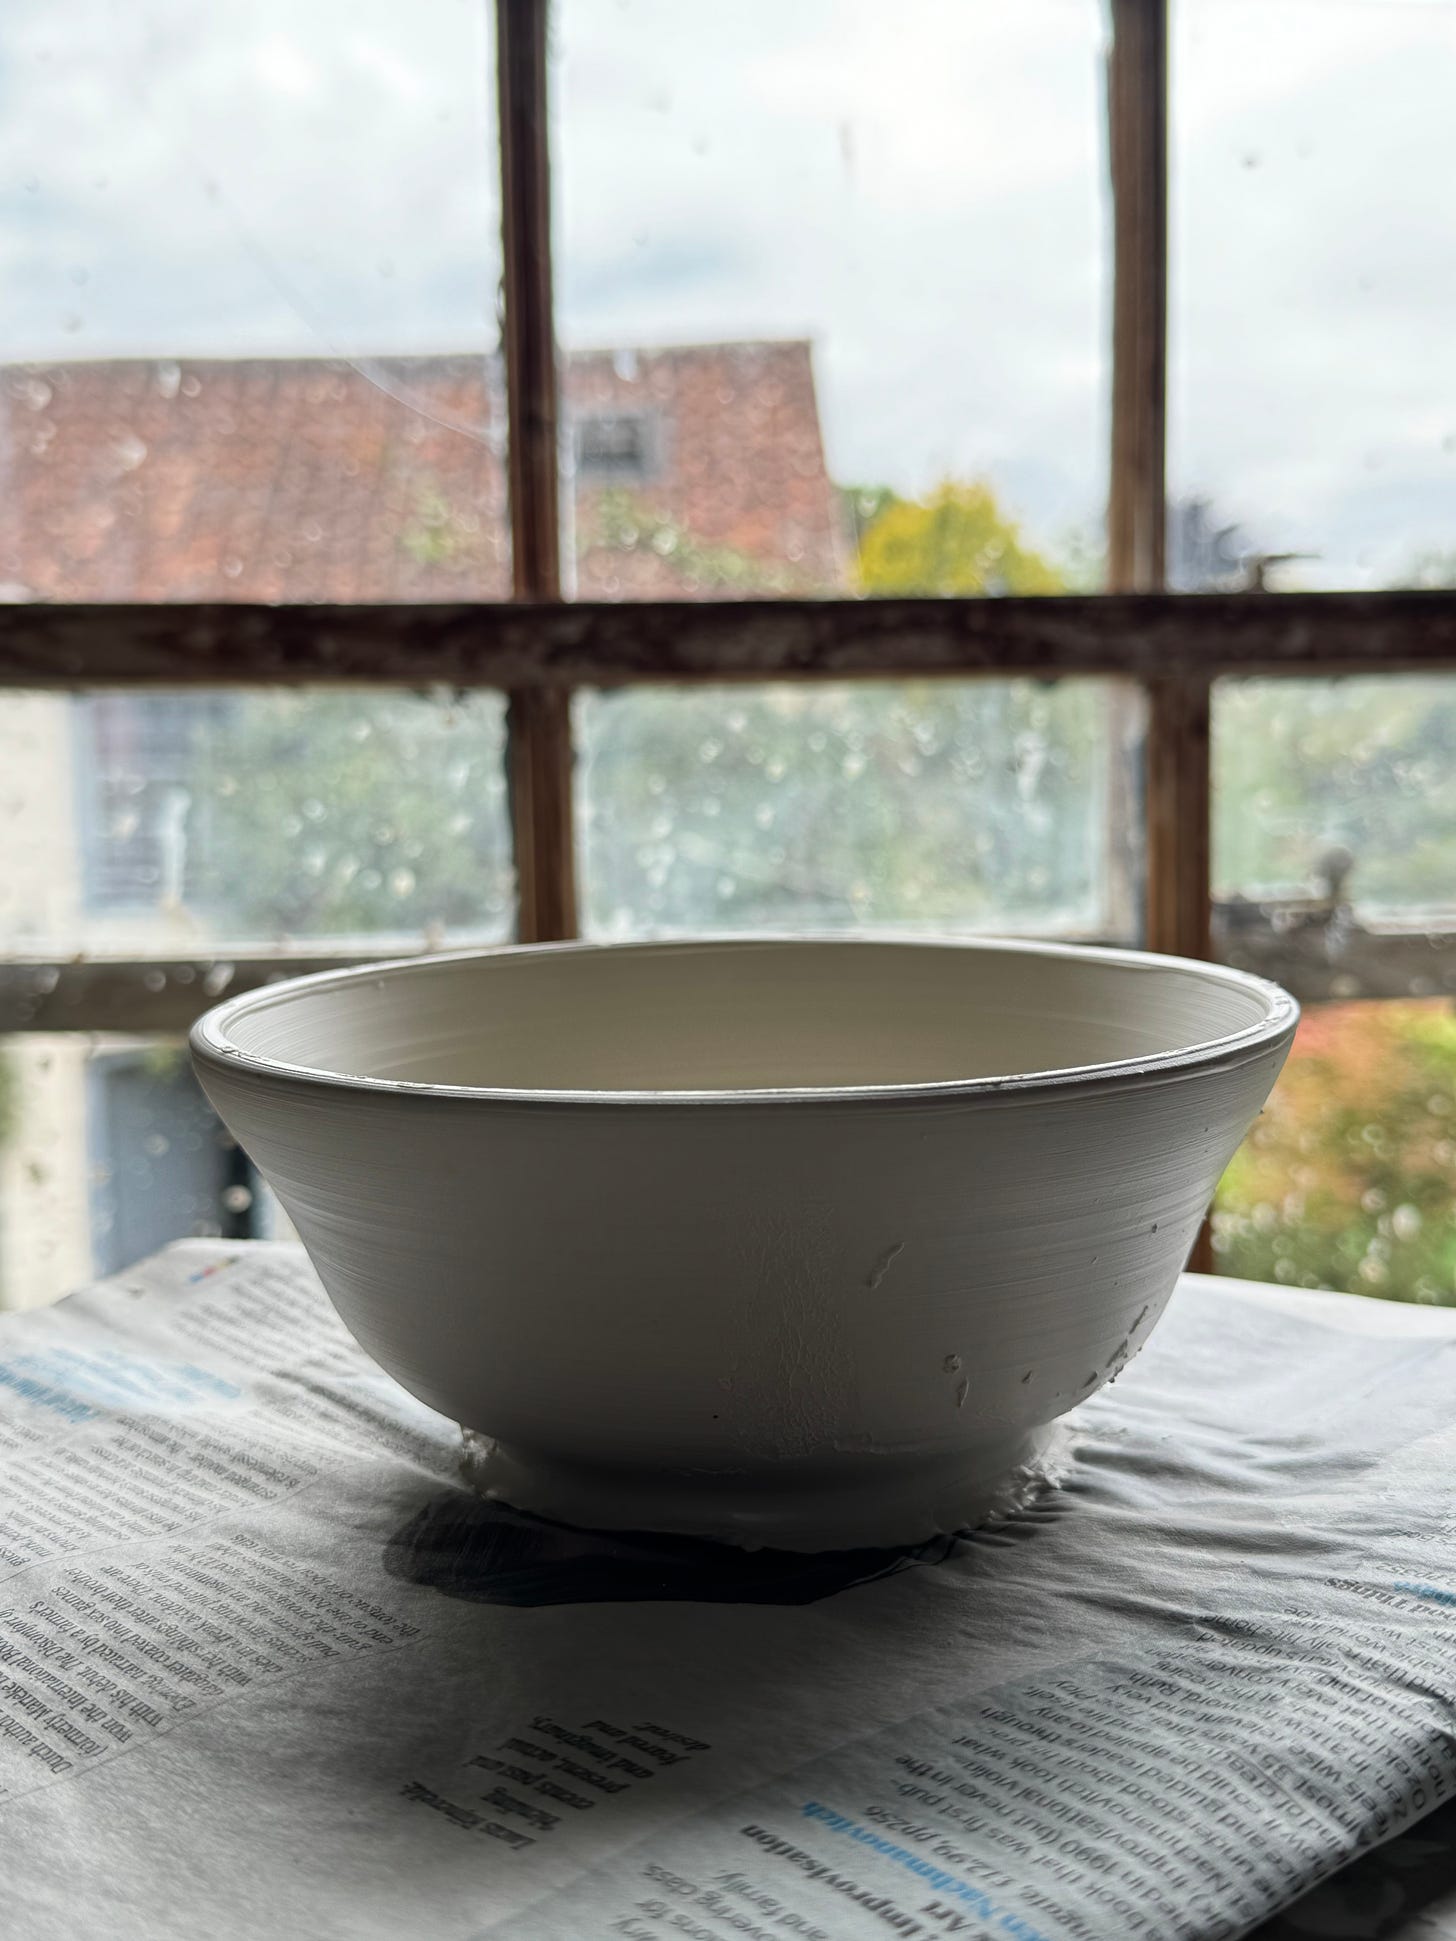 A freshly thrown porcelain bowl on a piece of newspaper in front of a wooden sash window